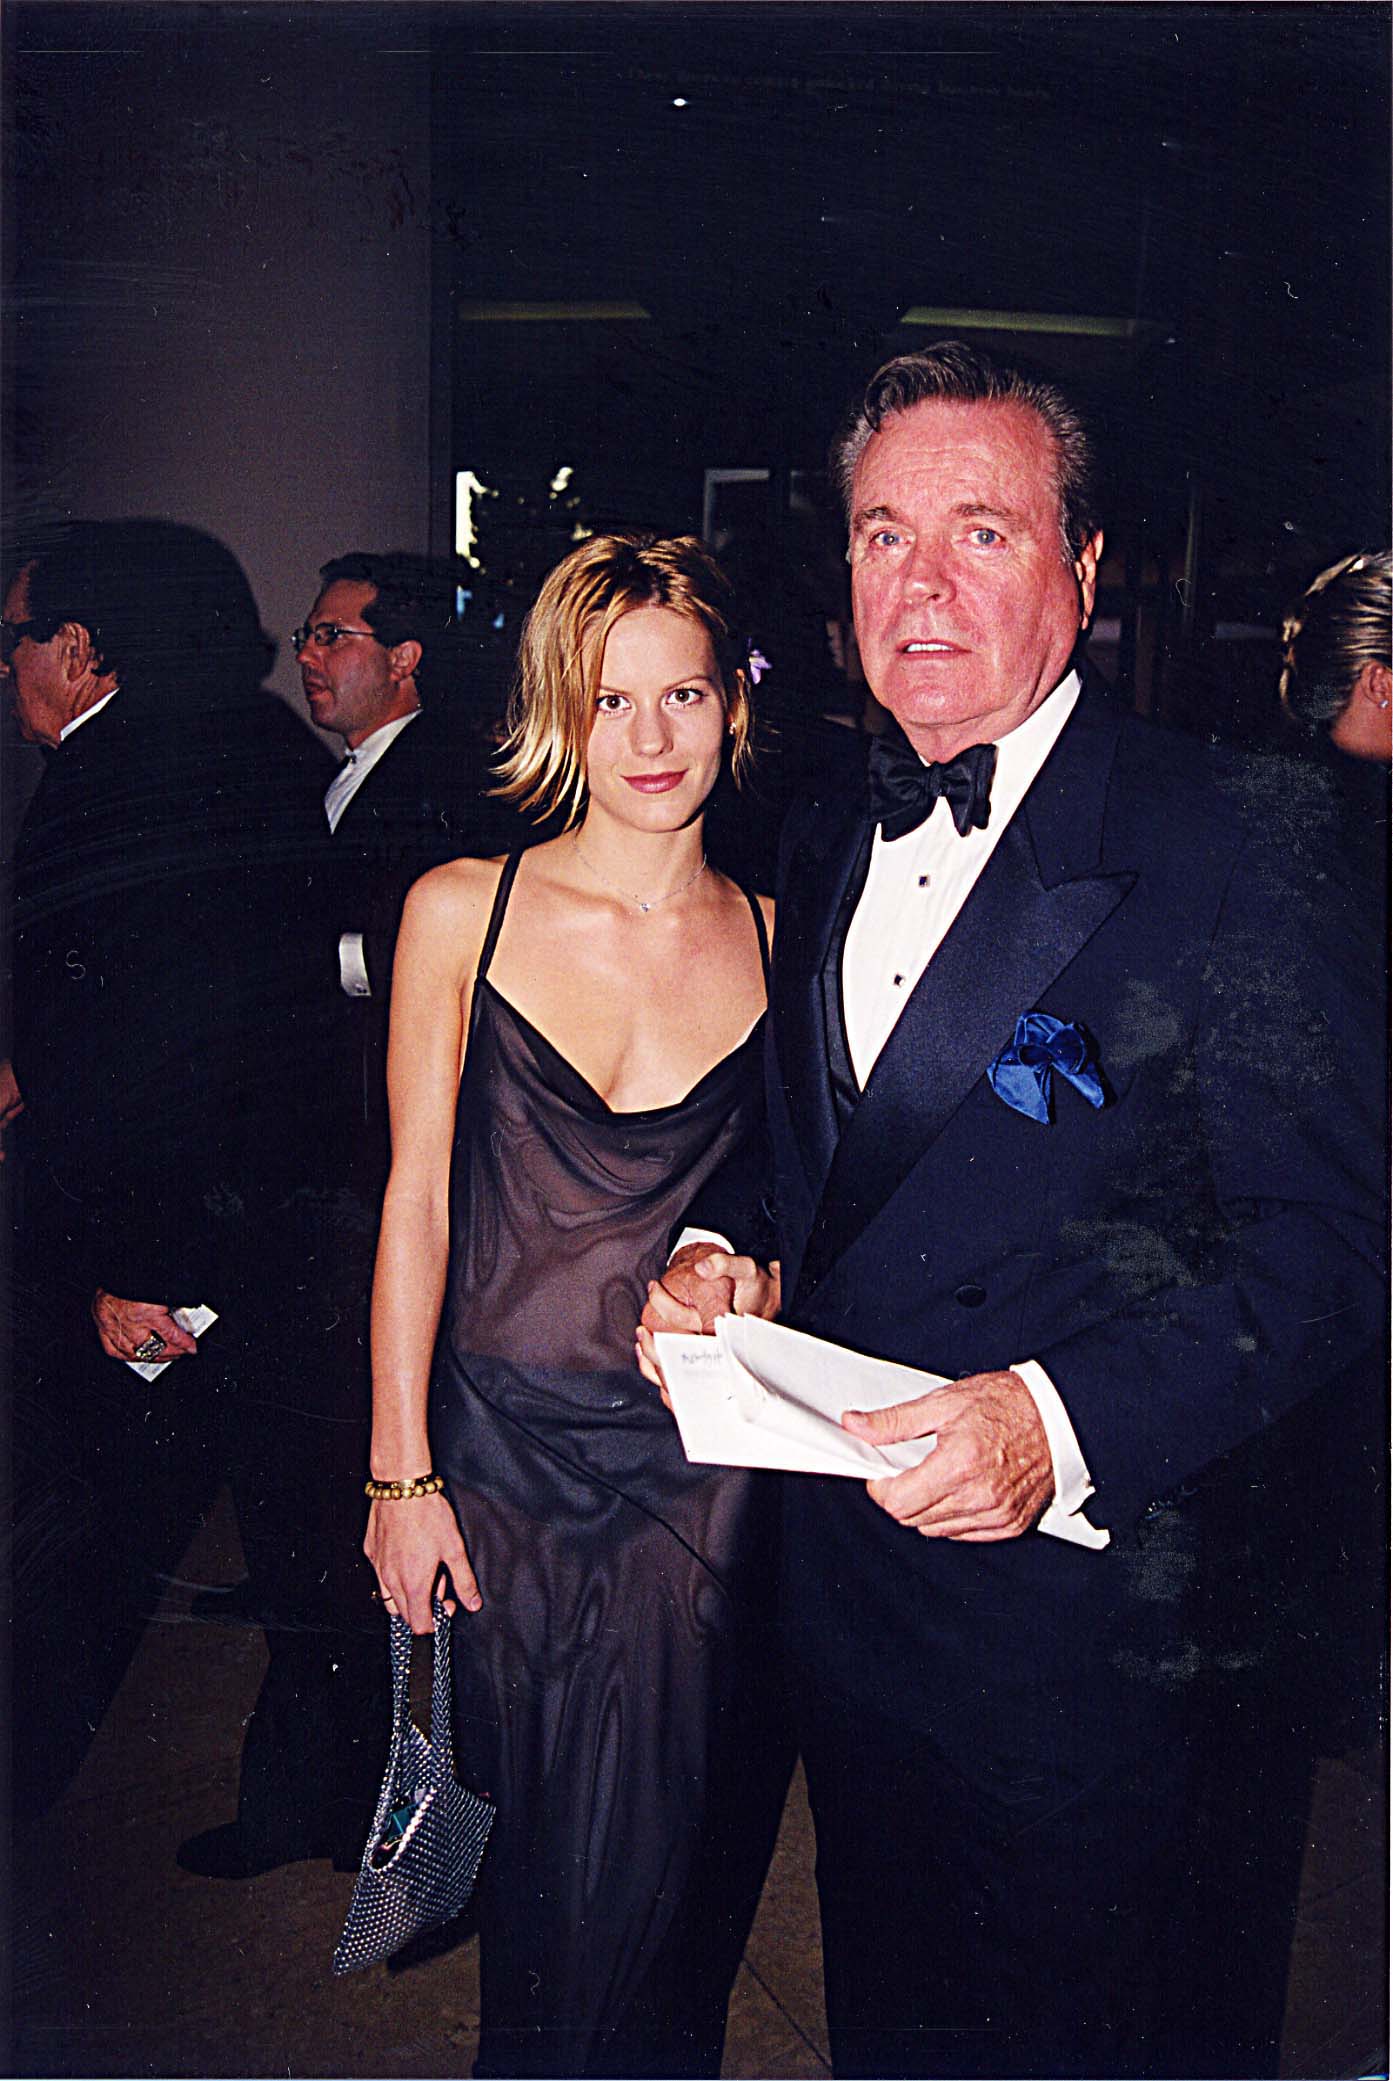 Courtney Brooke Wagner and her father Robert Wagner attend the Achievement Awards on September 6, 1998. ┃Source: Getty Images